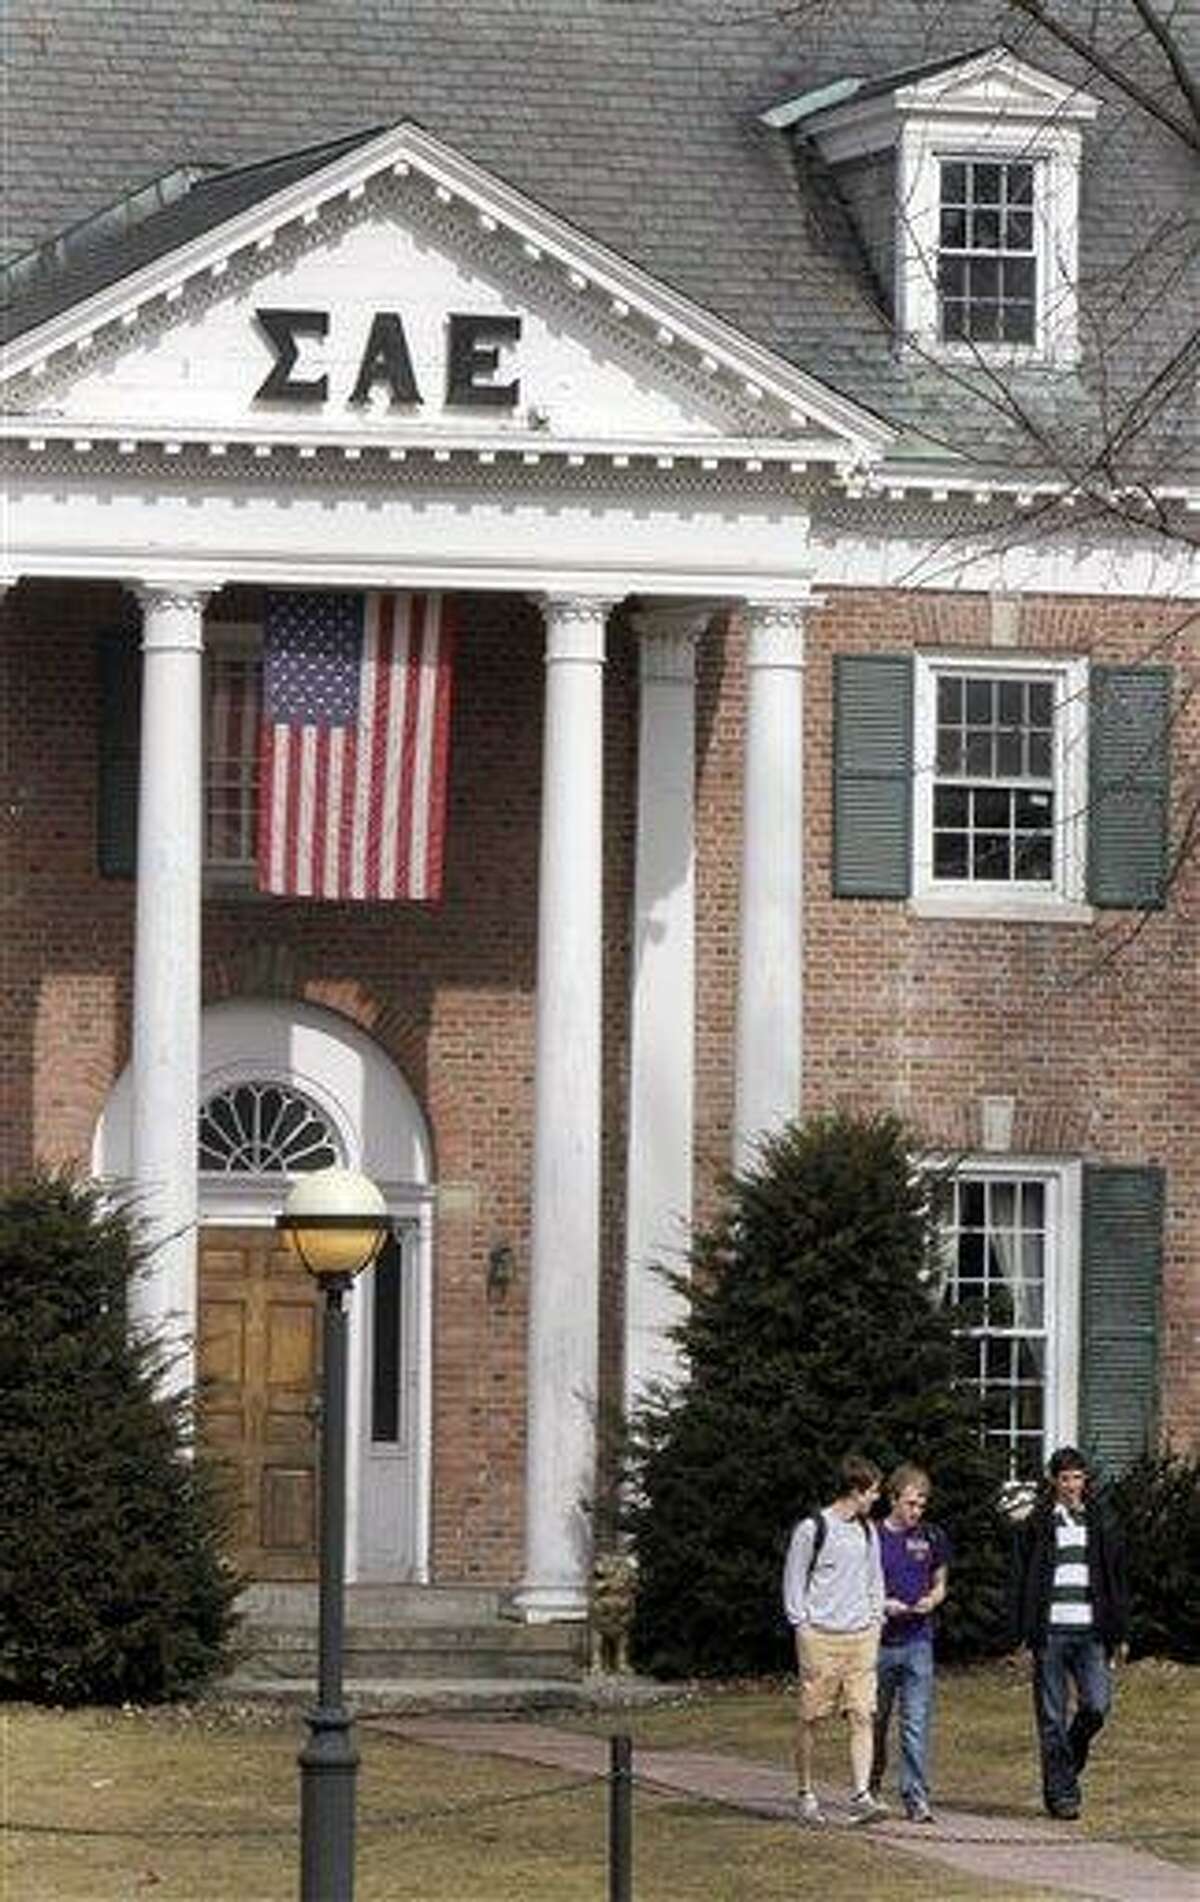 In this photo taken Monday, students leave the Sigma Alpha Epsilon fraternity on the Dartmouth College campus in Hanover, N.H. More than a quarter of the fraternity's membership has been accused by the school's judicial council of hazing after a former member alleged disgusting hazing practices. Associated Press